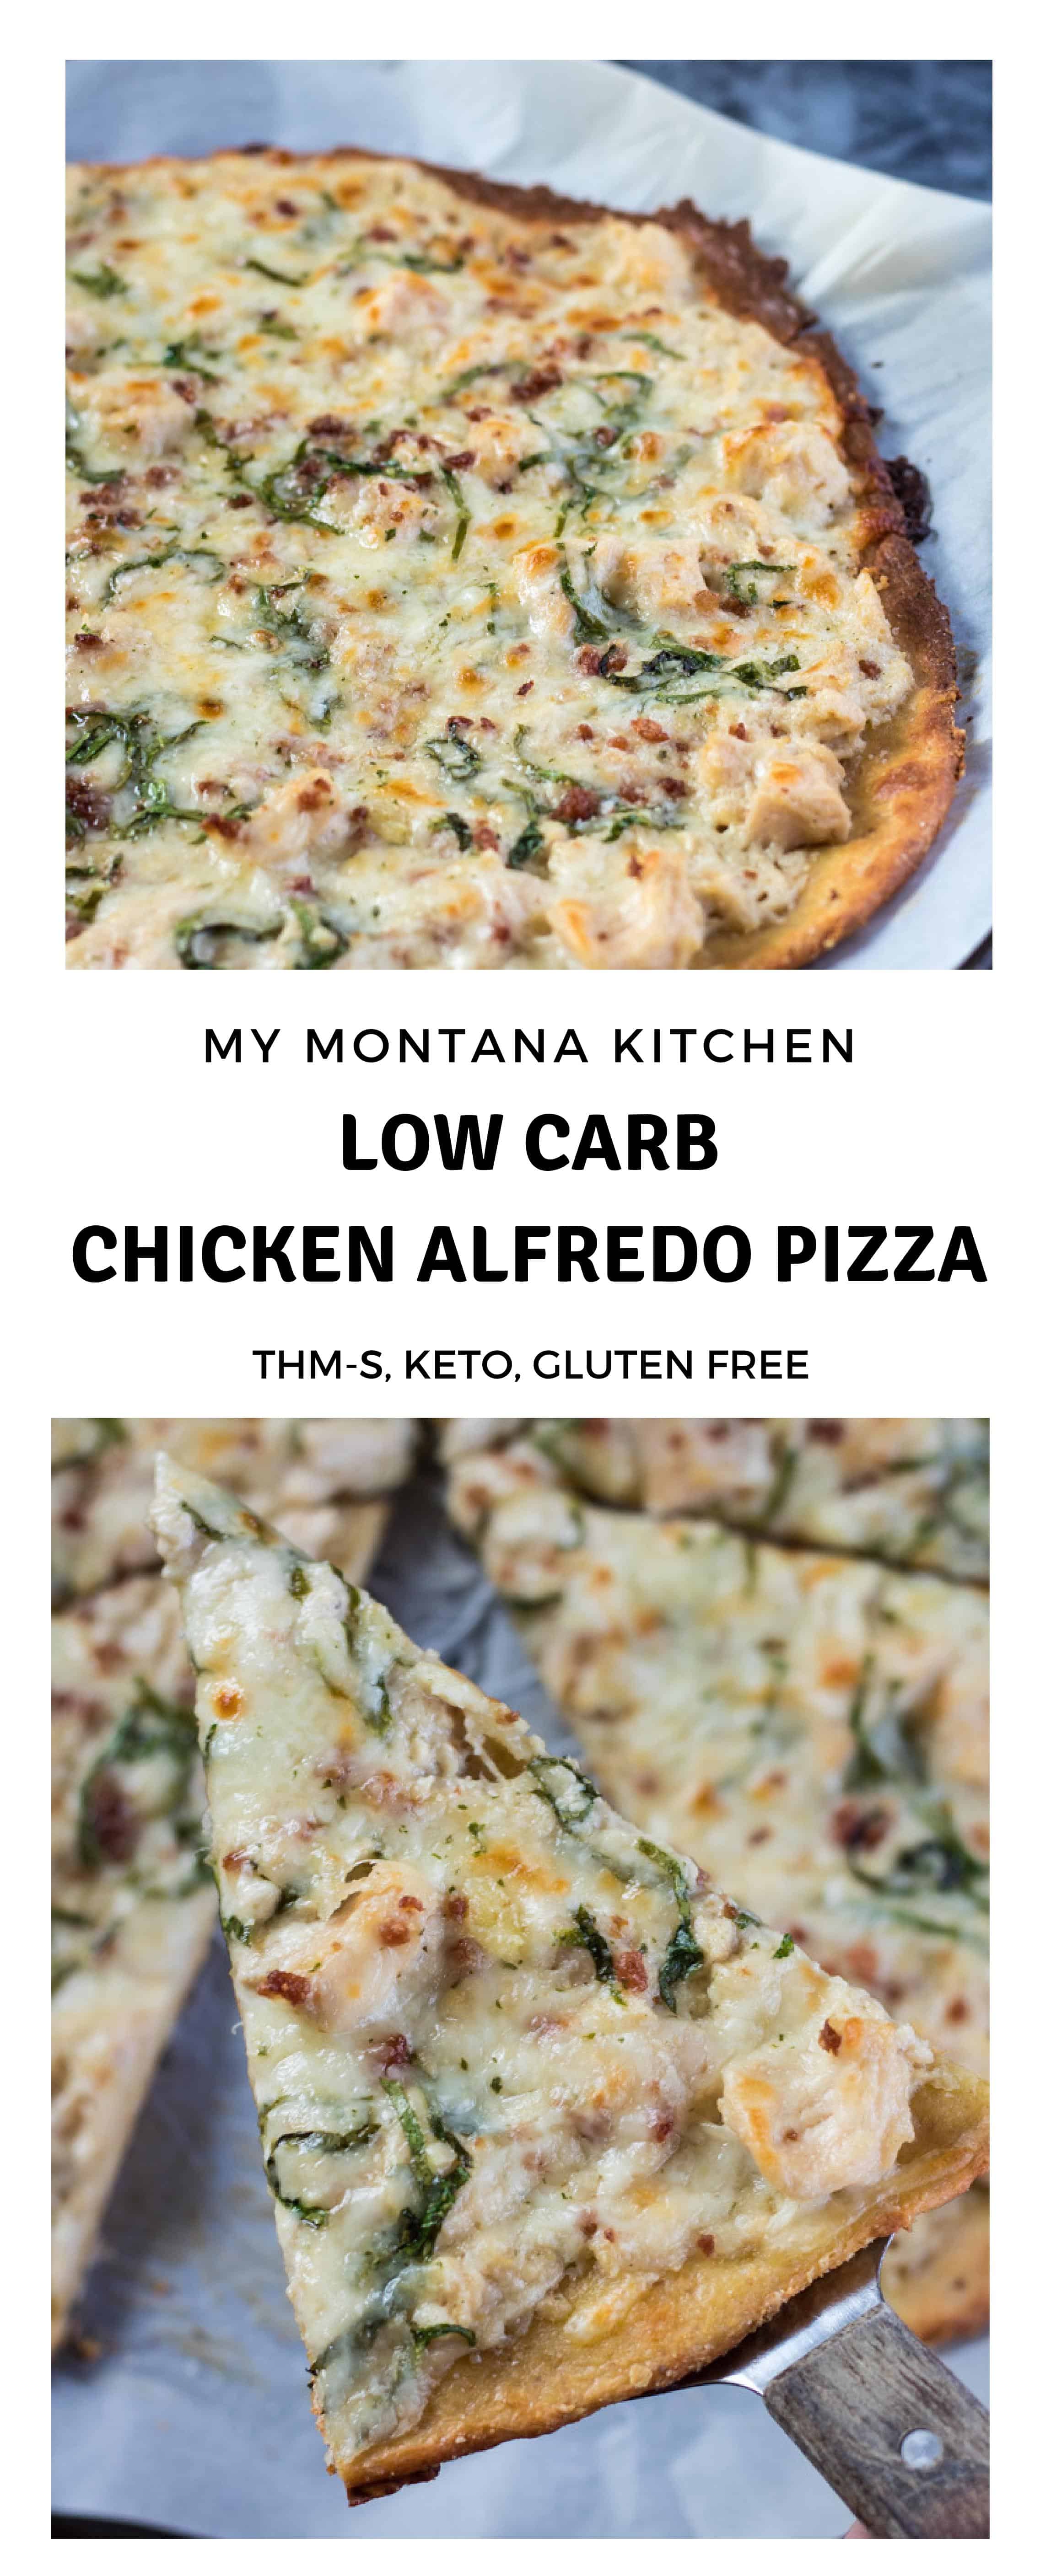 This low carb Chicken Alfredo Pizza recipe is a satisfying (and delicious!) gluten free pizza that you're going to want to make again and again. Just because you're eating low carb, doesn't mean you have to sacrifice your favorite foods. This low carb Chicken Alfredo Pizza recipe is proof of that! With the perfect low carb crust and creamy parmesan garlic sauce, this Chicken Alfredo Pizza makes a great low carb family dinner! #pizza #lowcarbpizza #ketopizza #alfredo #alfredopizza #lowcarb #keto #glutenfree #trimhealthymama #thms #thmpizzarecipe #familydinnerrecipe